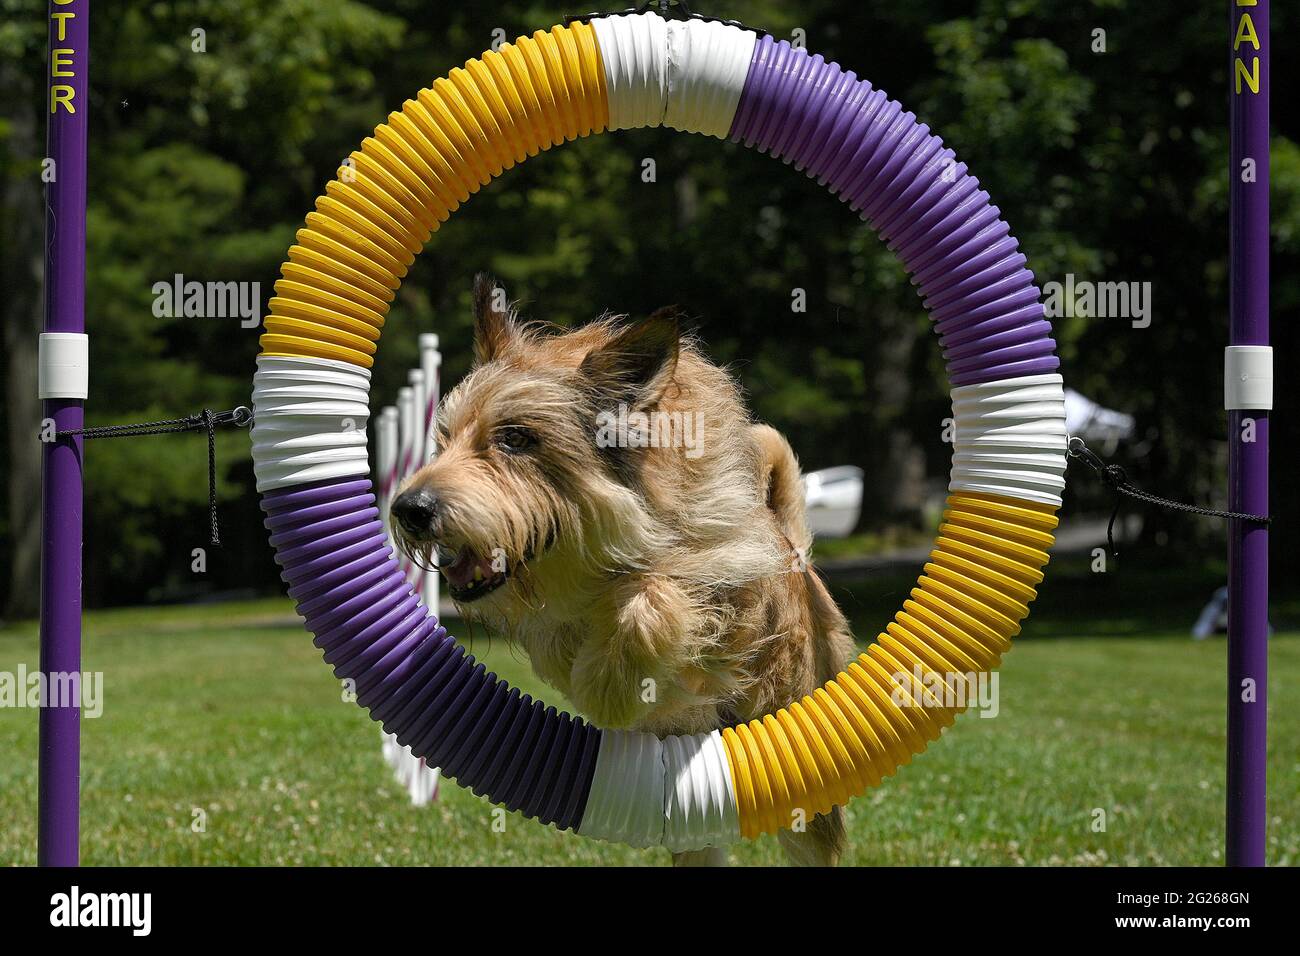 Tarrytown, USA. 08th June, 2021. A display of agility by a Berger Picard named “Chester” during press preview day for the 145th Annual Westminster Kennel Club Dog Show at Lyndhurst Estate in Tarrytown, NY, June 8, 2021. Due to the COVID-19 pandemic, the venue for the WKC Dog Show has been moved from Madison Square Garden to the Lyndhurst Estate in Westchester county outside of New York City. (Photo by Anthony Behar/Sipa USA) Credit: Sipa USA/Alamy Live News Stock Photo